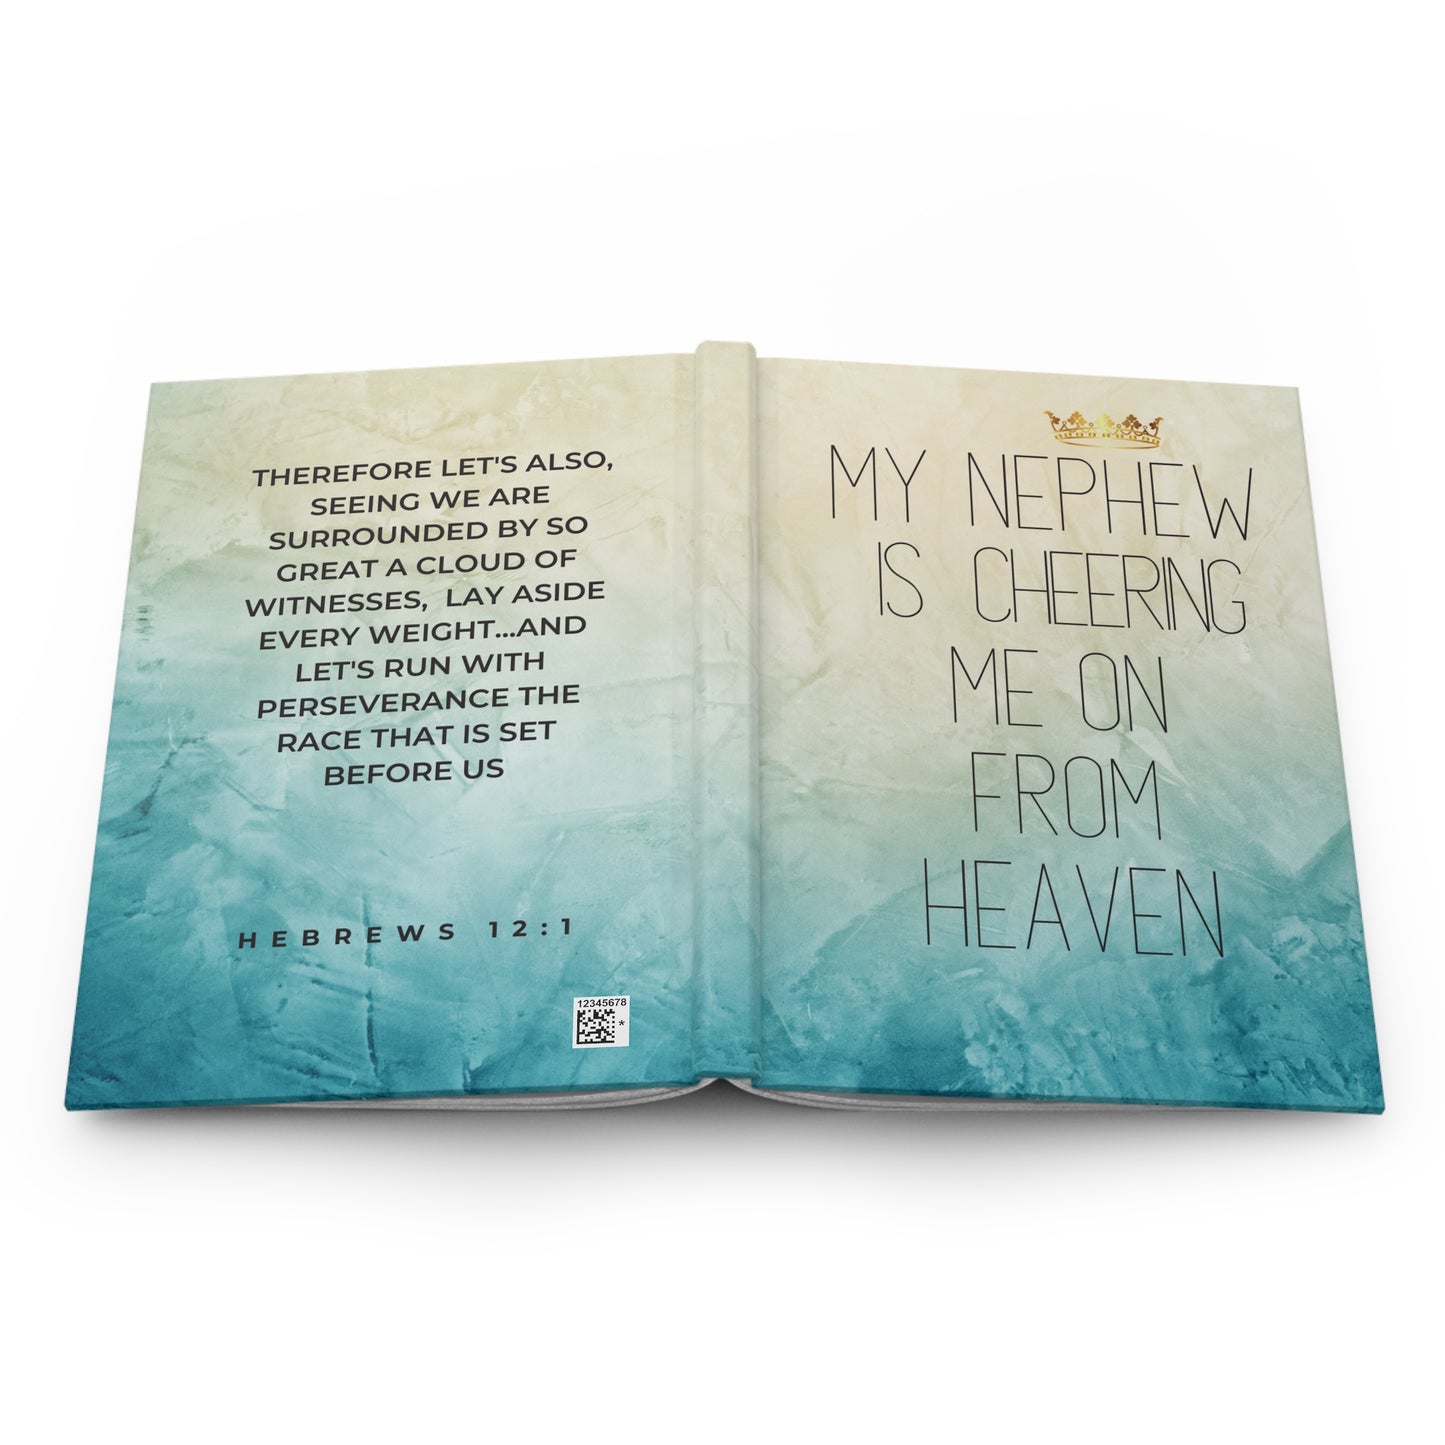 Grief Journal for Loss of Nephew, Cheering Me On From Heaven